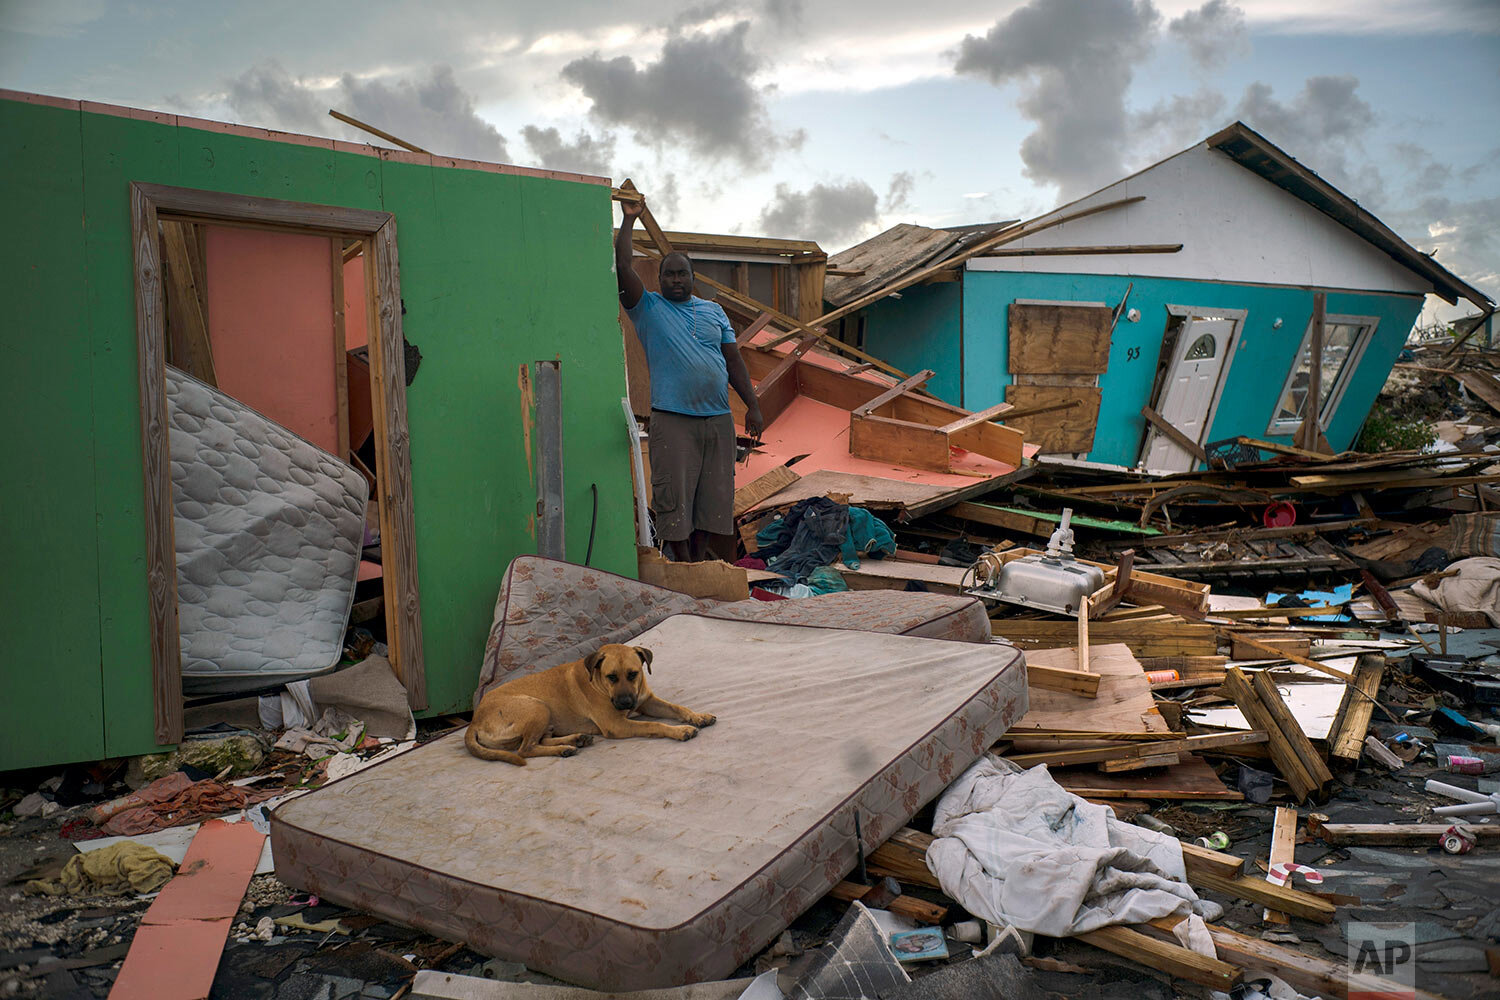  A man stands next to a destroyed house as a dog named Francoise rests on a mattress in the rubble left by Hurricane Dorian in Abaco, Bahamas, Monday, Sept. 16, 2019. (AP Photo/Ramon Espinosa) 